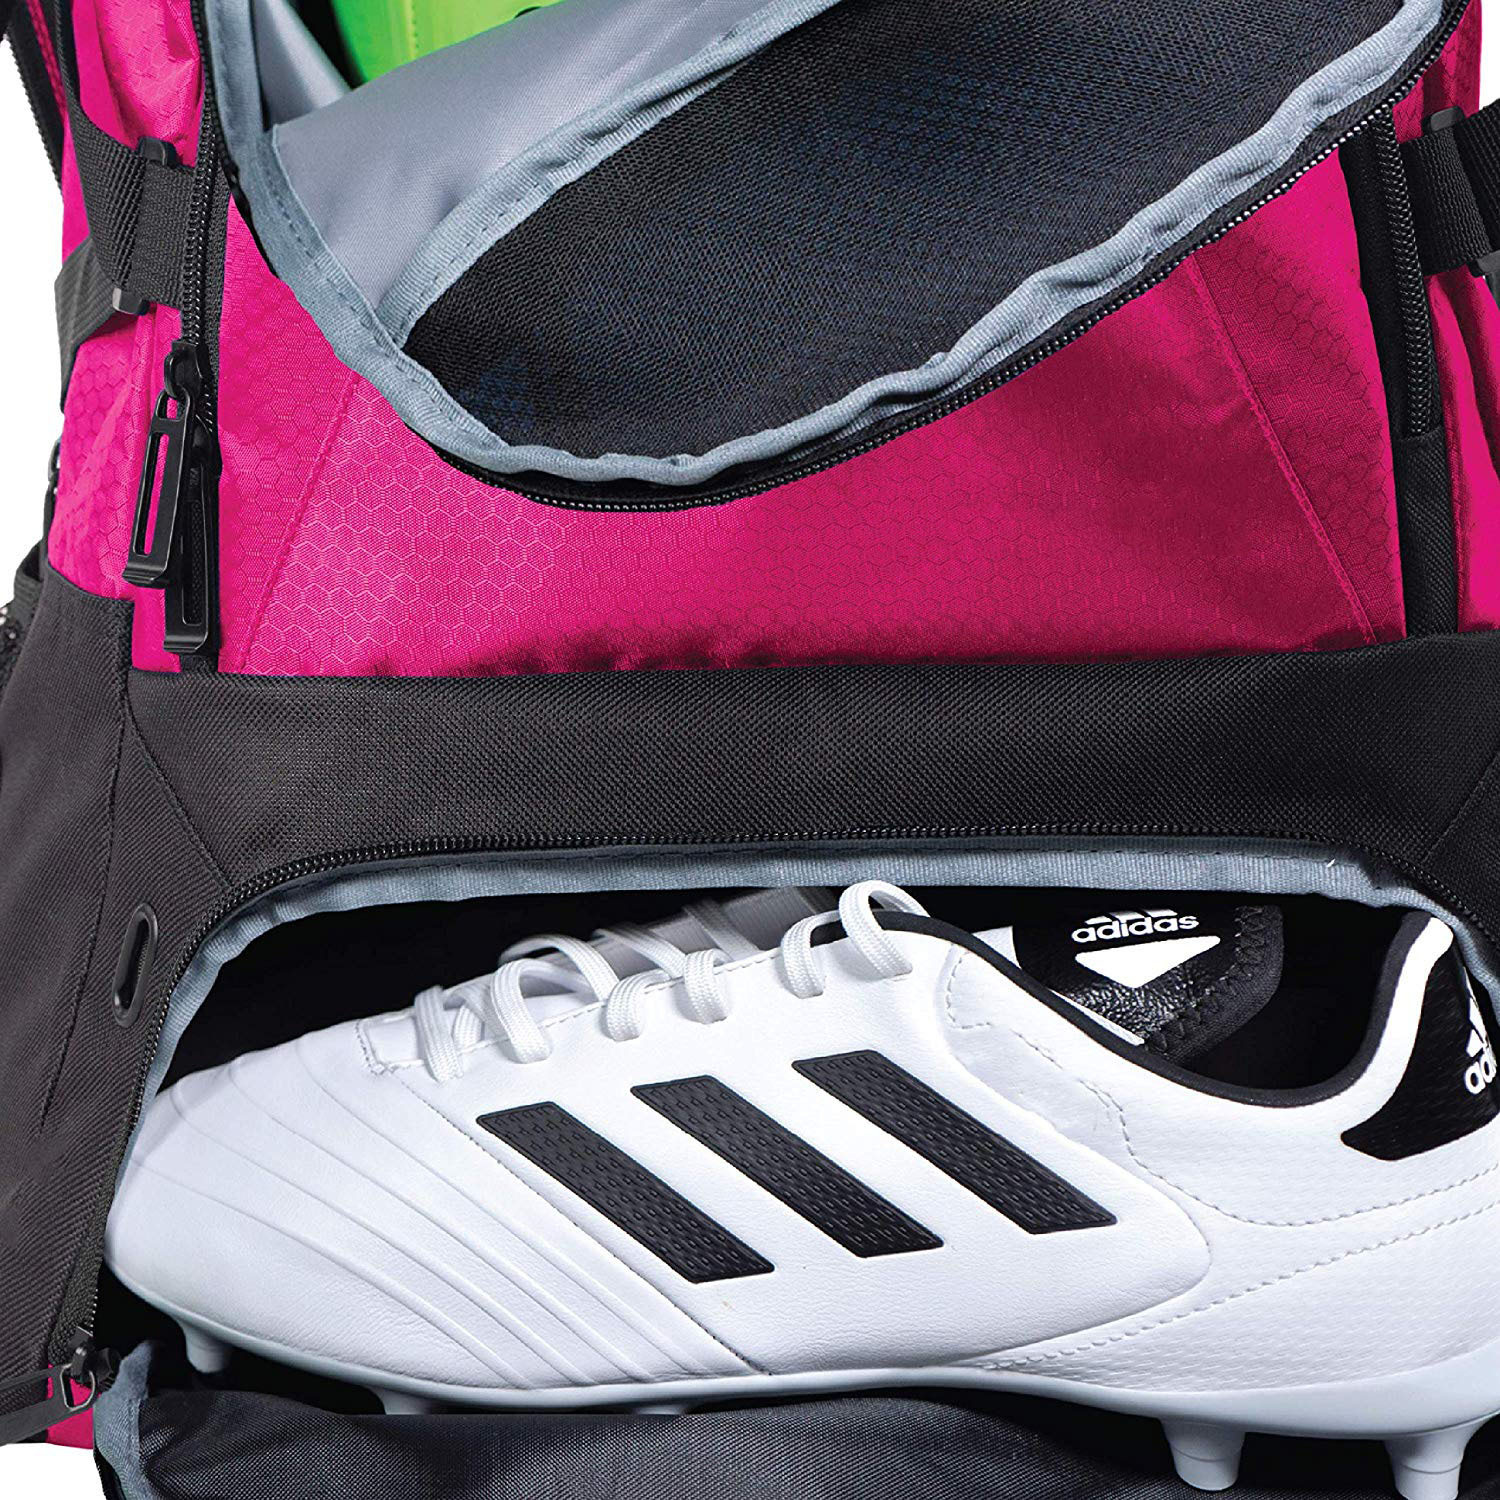 ODM/OEM Multifunctional Water Resistenza all'acqua Sport Soccer Bag Shoes Shoes Shotpack per il logo personalizzato